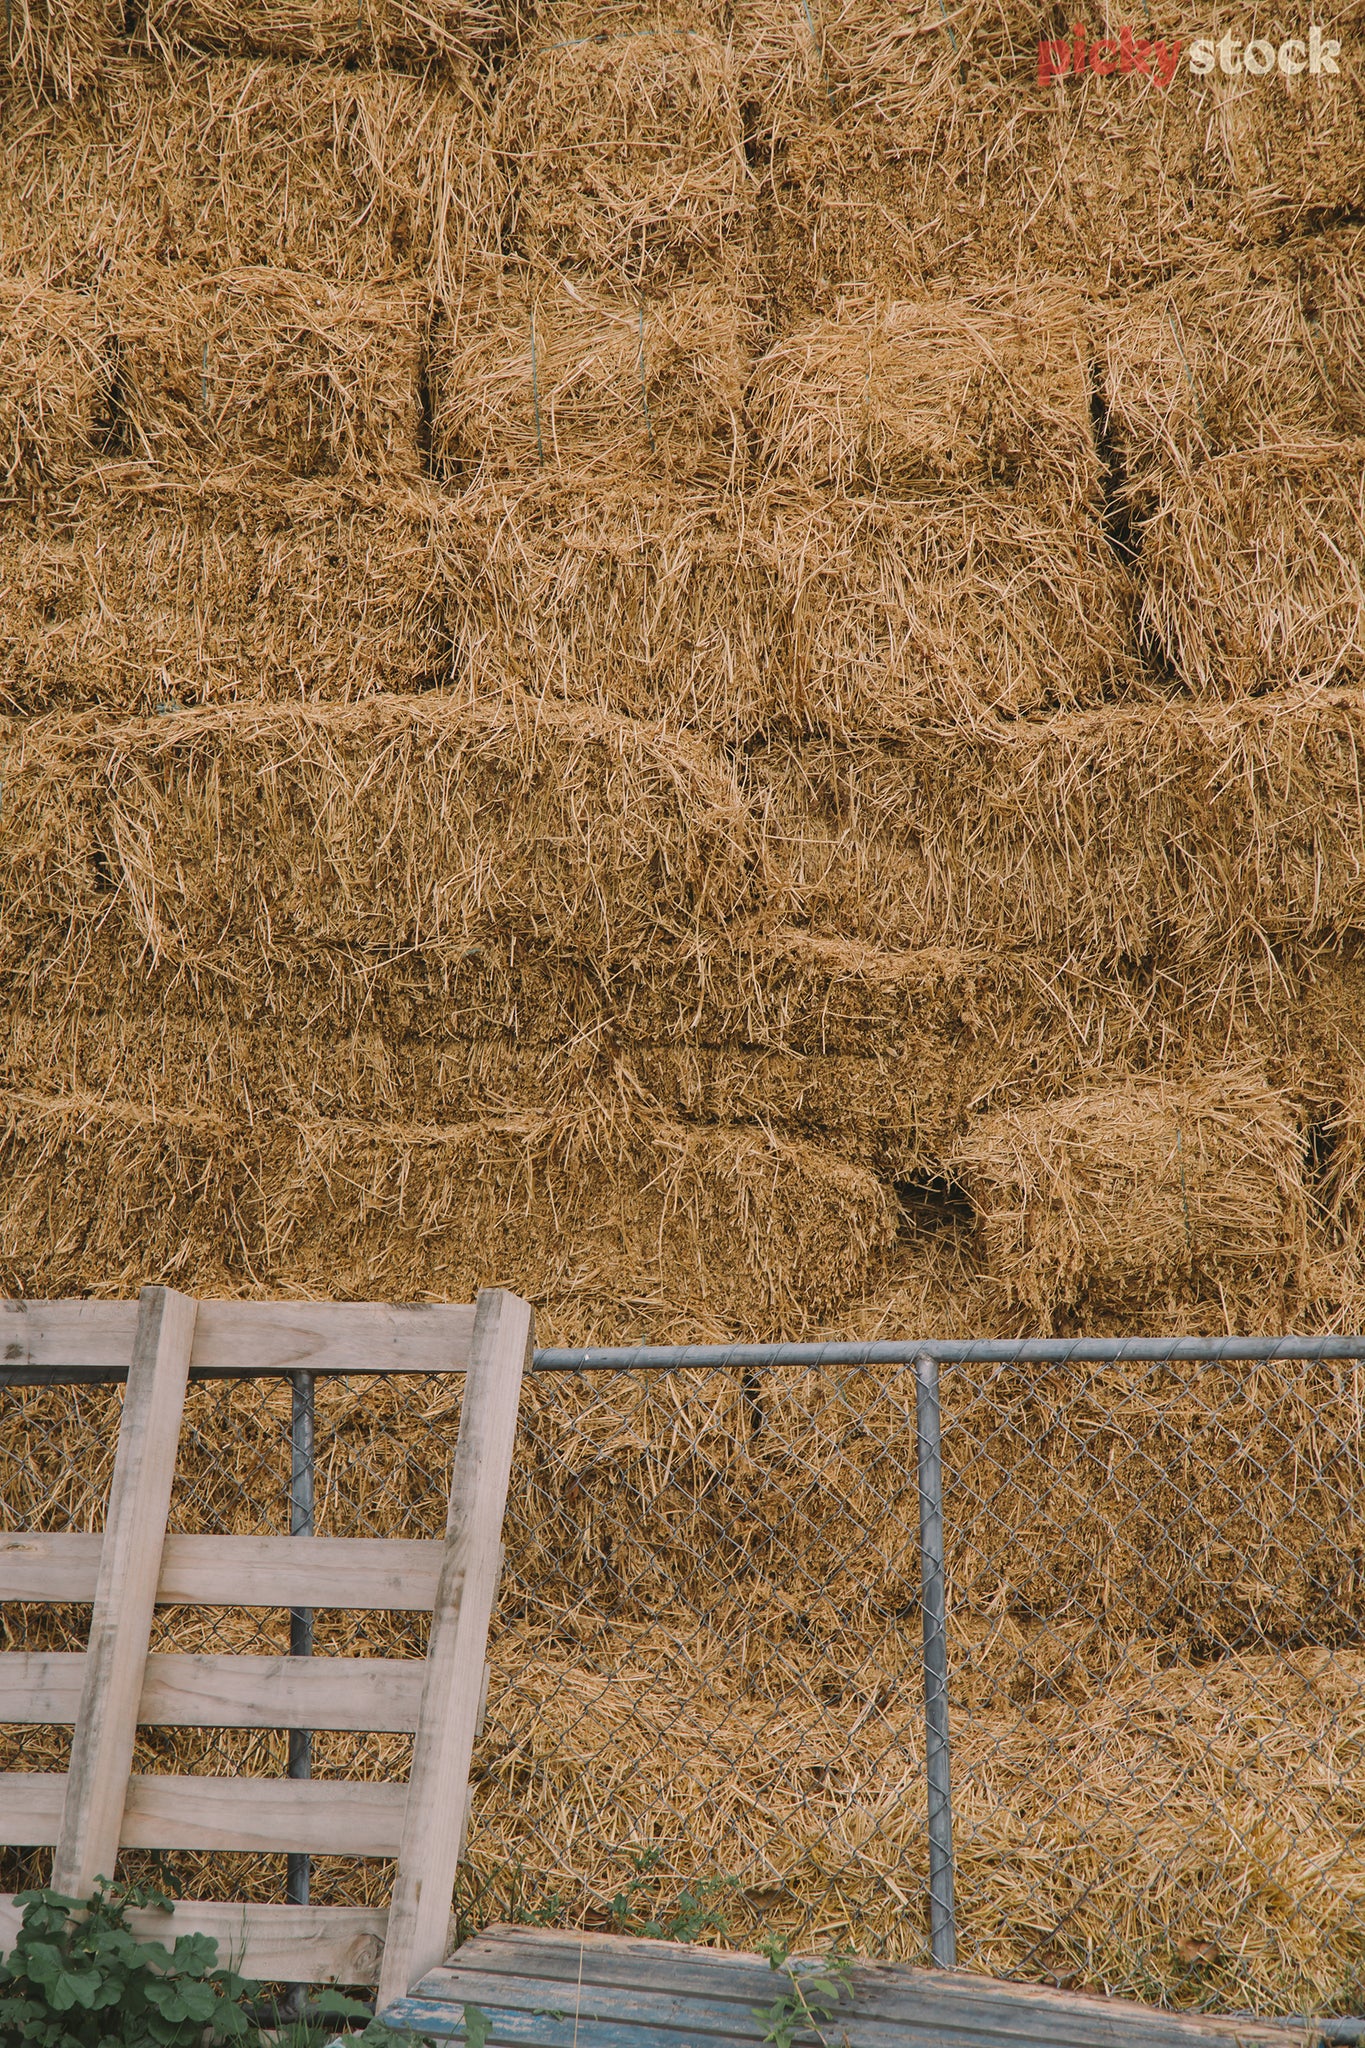 Hay stacked up